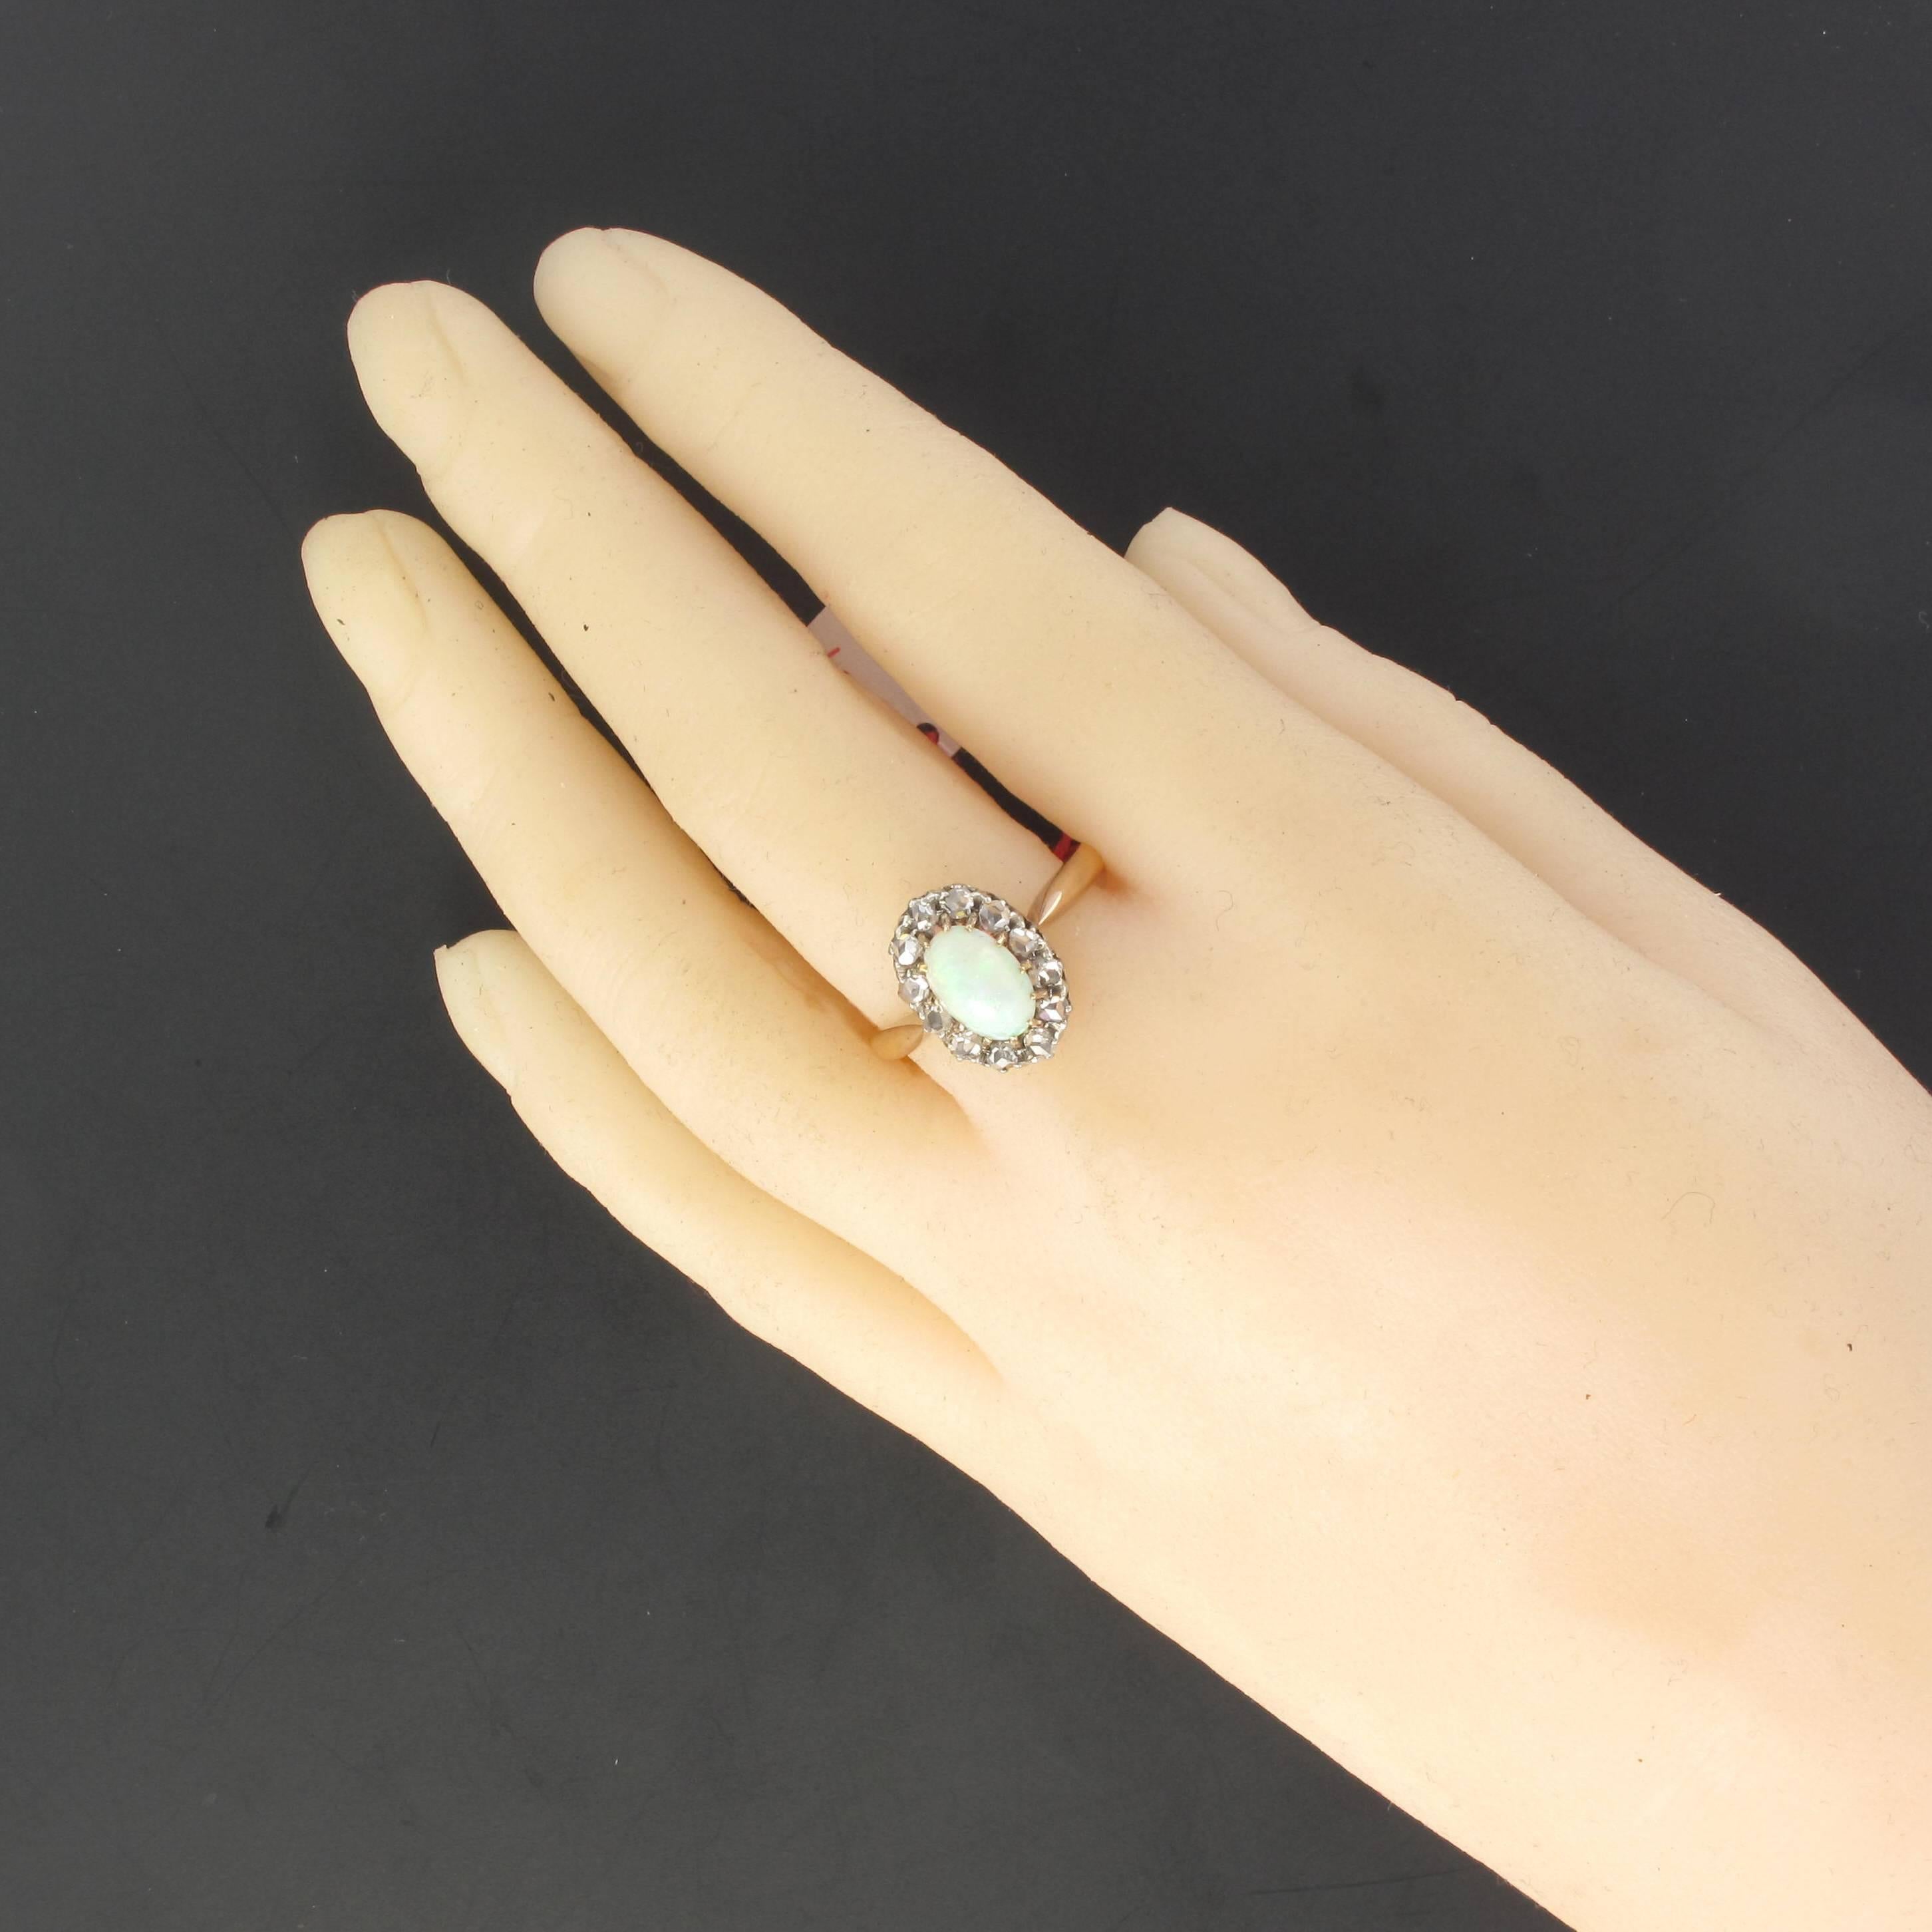 Ring in 18 karat rose gold. 
This ring features a 12 claw set opal cabochon with a halo of rose cut diamonds. 
Height: 1.4 cm, width 1.1 cm, thickness: 8 mm.
Opal weight: about 1.05 carats.
Total weight of the jewel: 5 g approximately.
US Size :